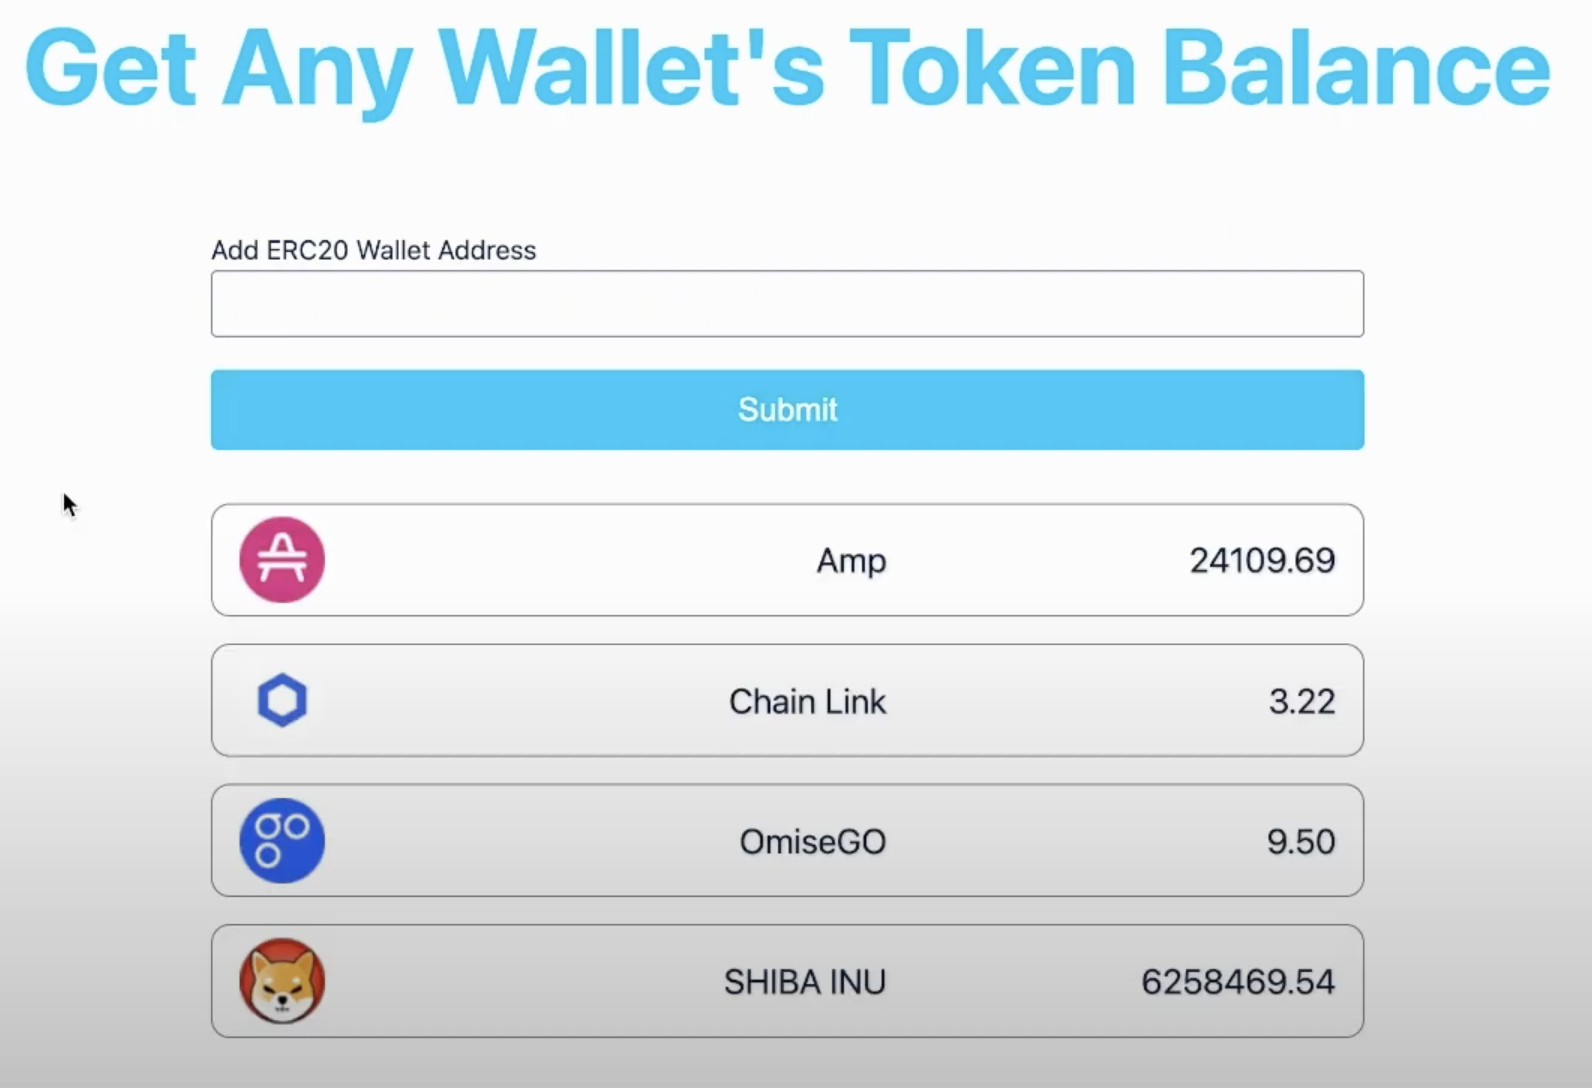 application page showing input field to enter in a wallet address and also showing the submit button